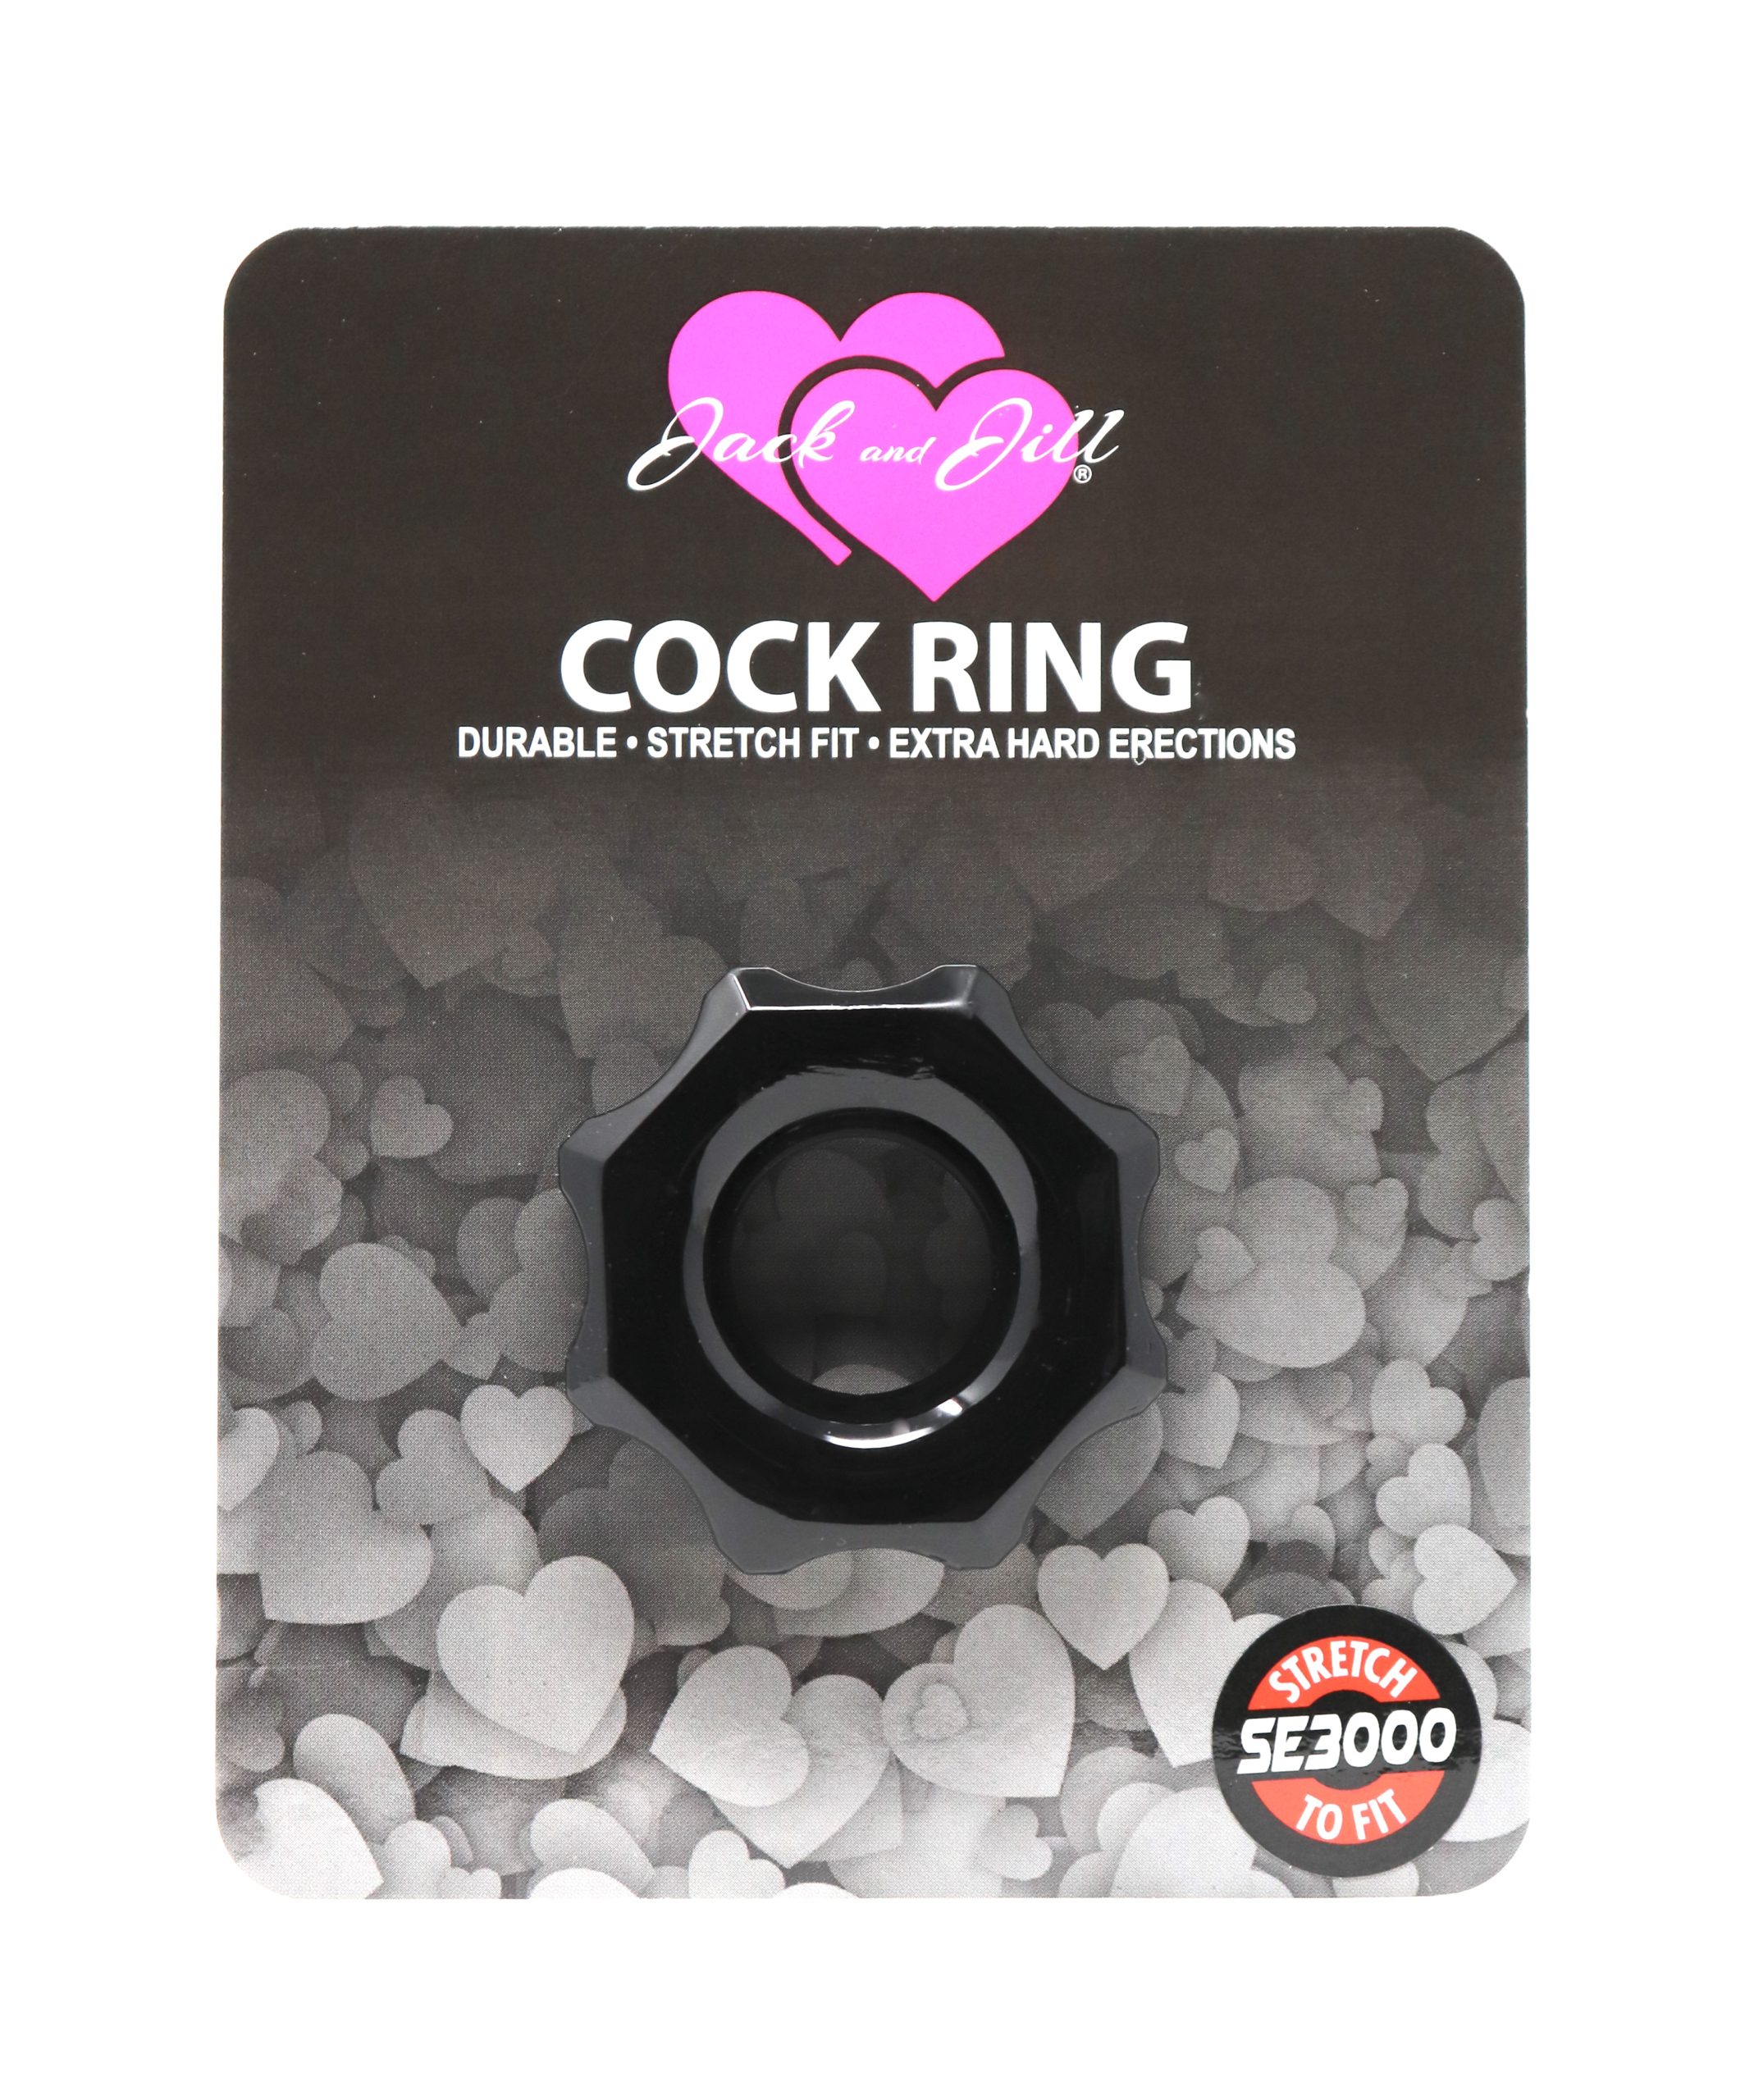 Jack and Jill Gear Black cock ring